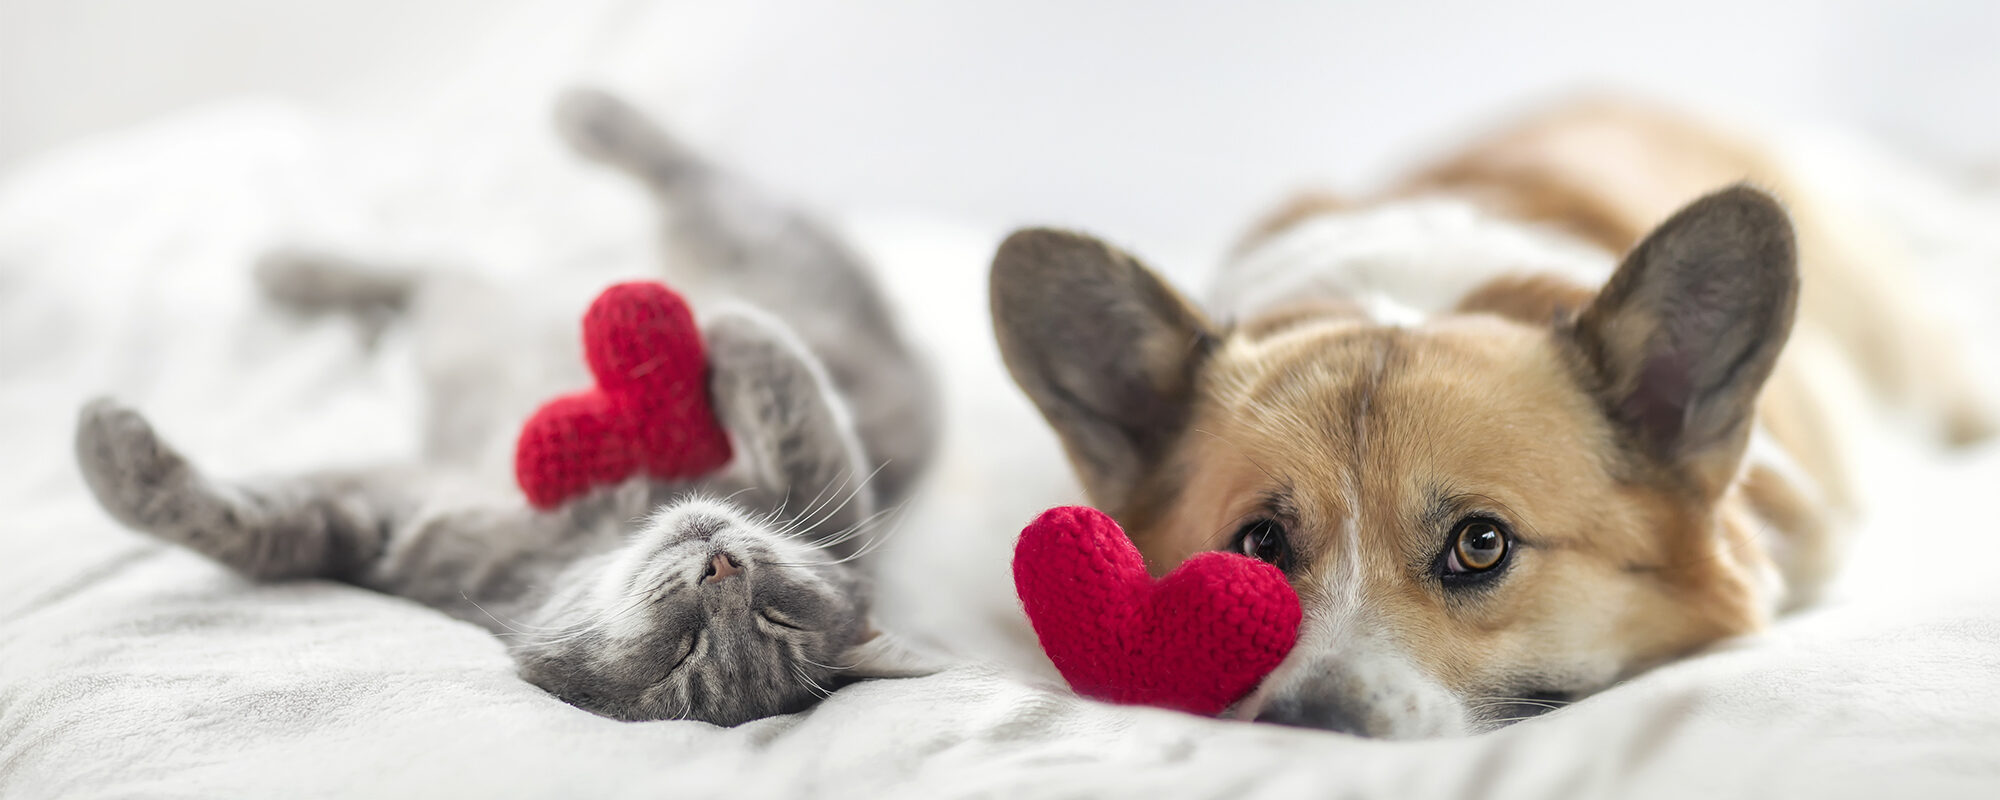 cute cat and corgi dog are lying on a white bed together surrounded by knitted red hearts